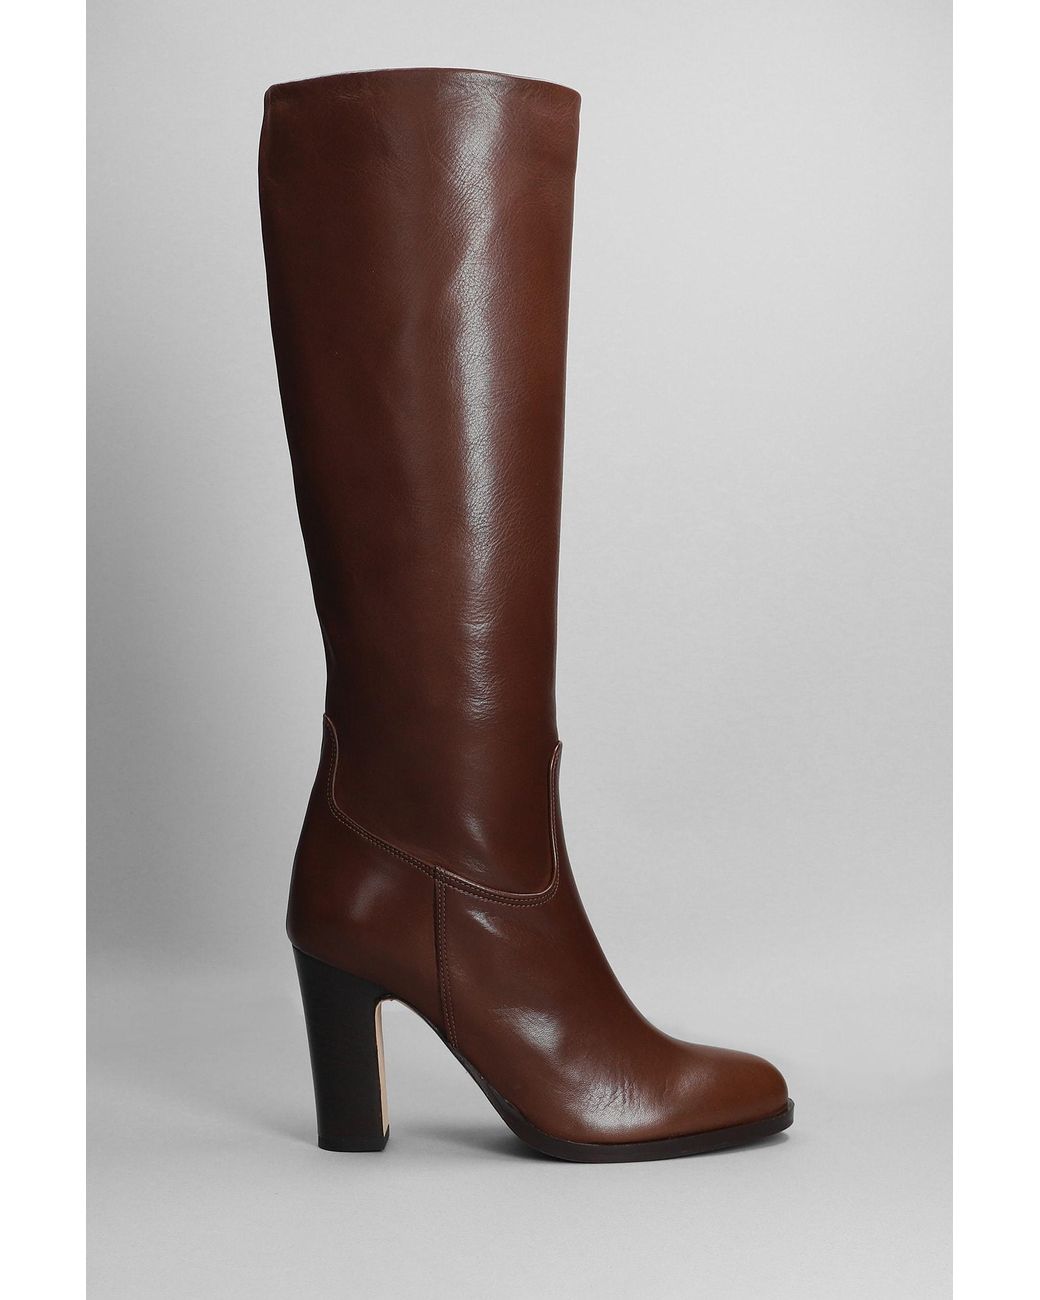 Julie Dee High Heels Boots In Brown Leather | Lyst